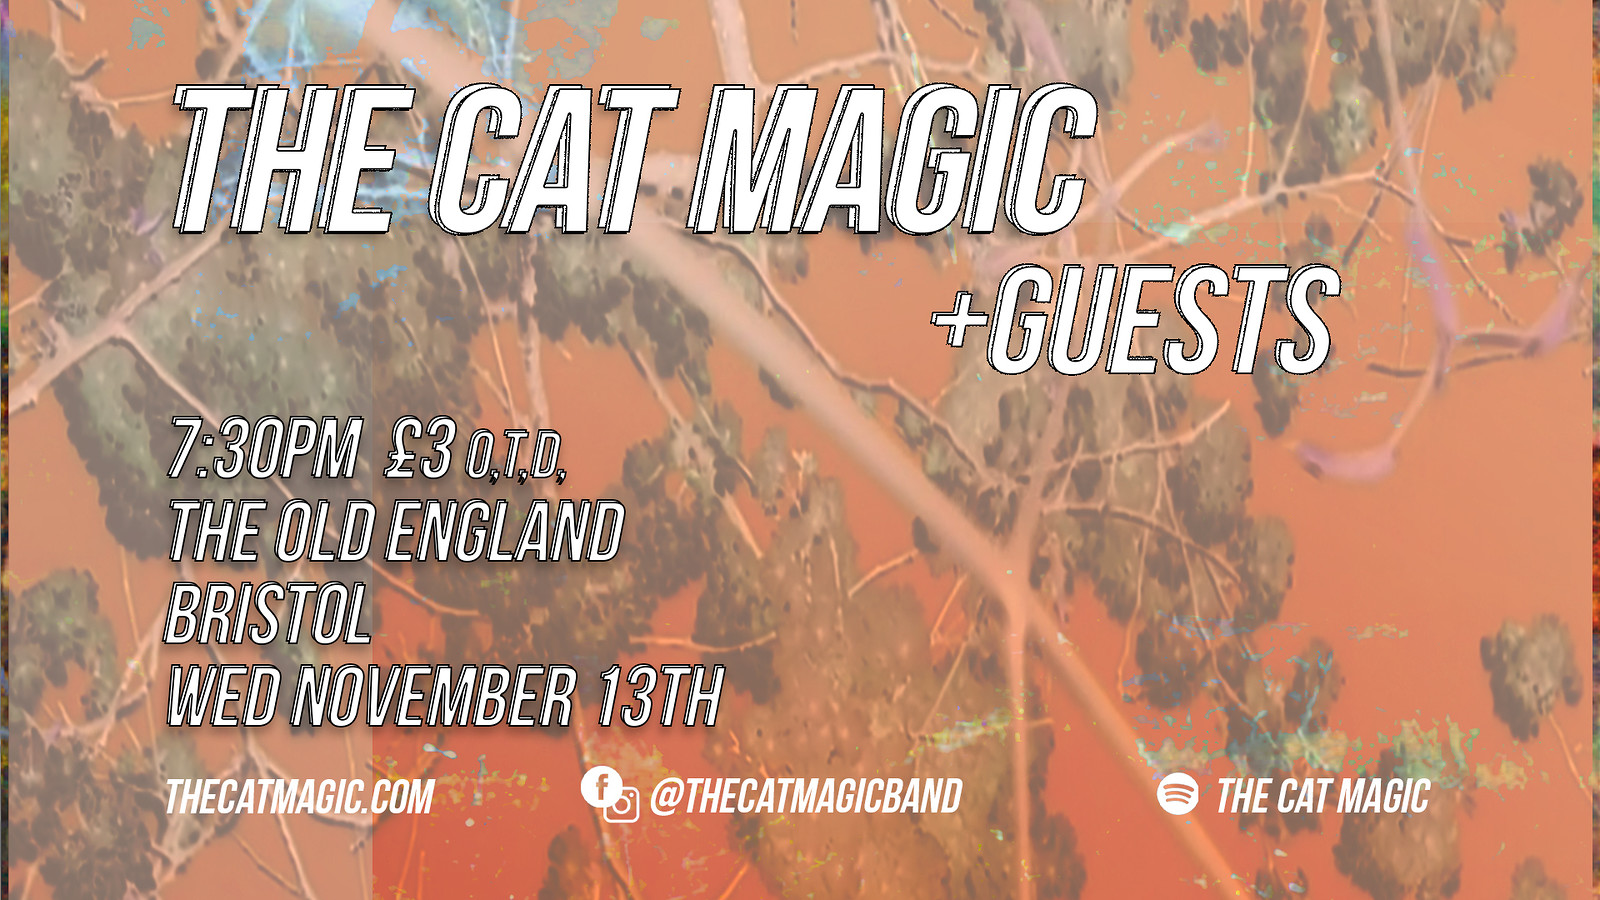 The Cat Magic at The Old England Pub